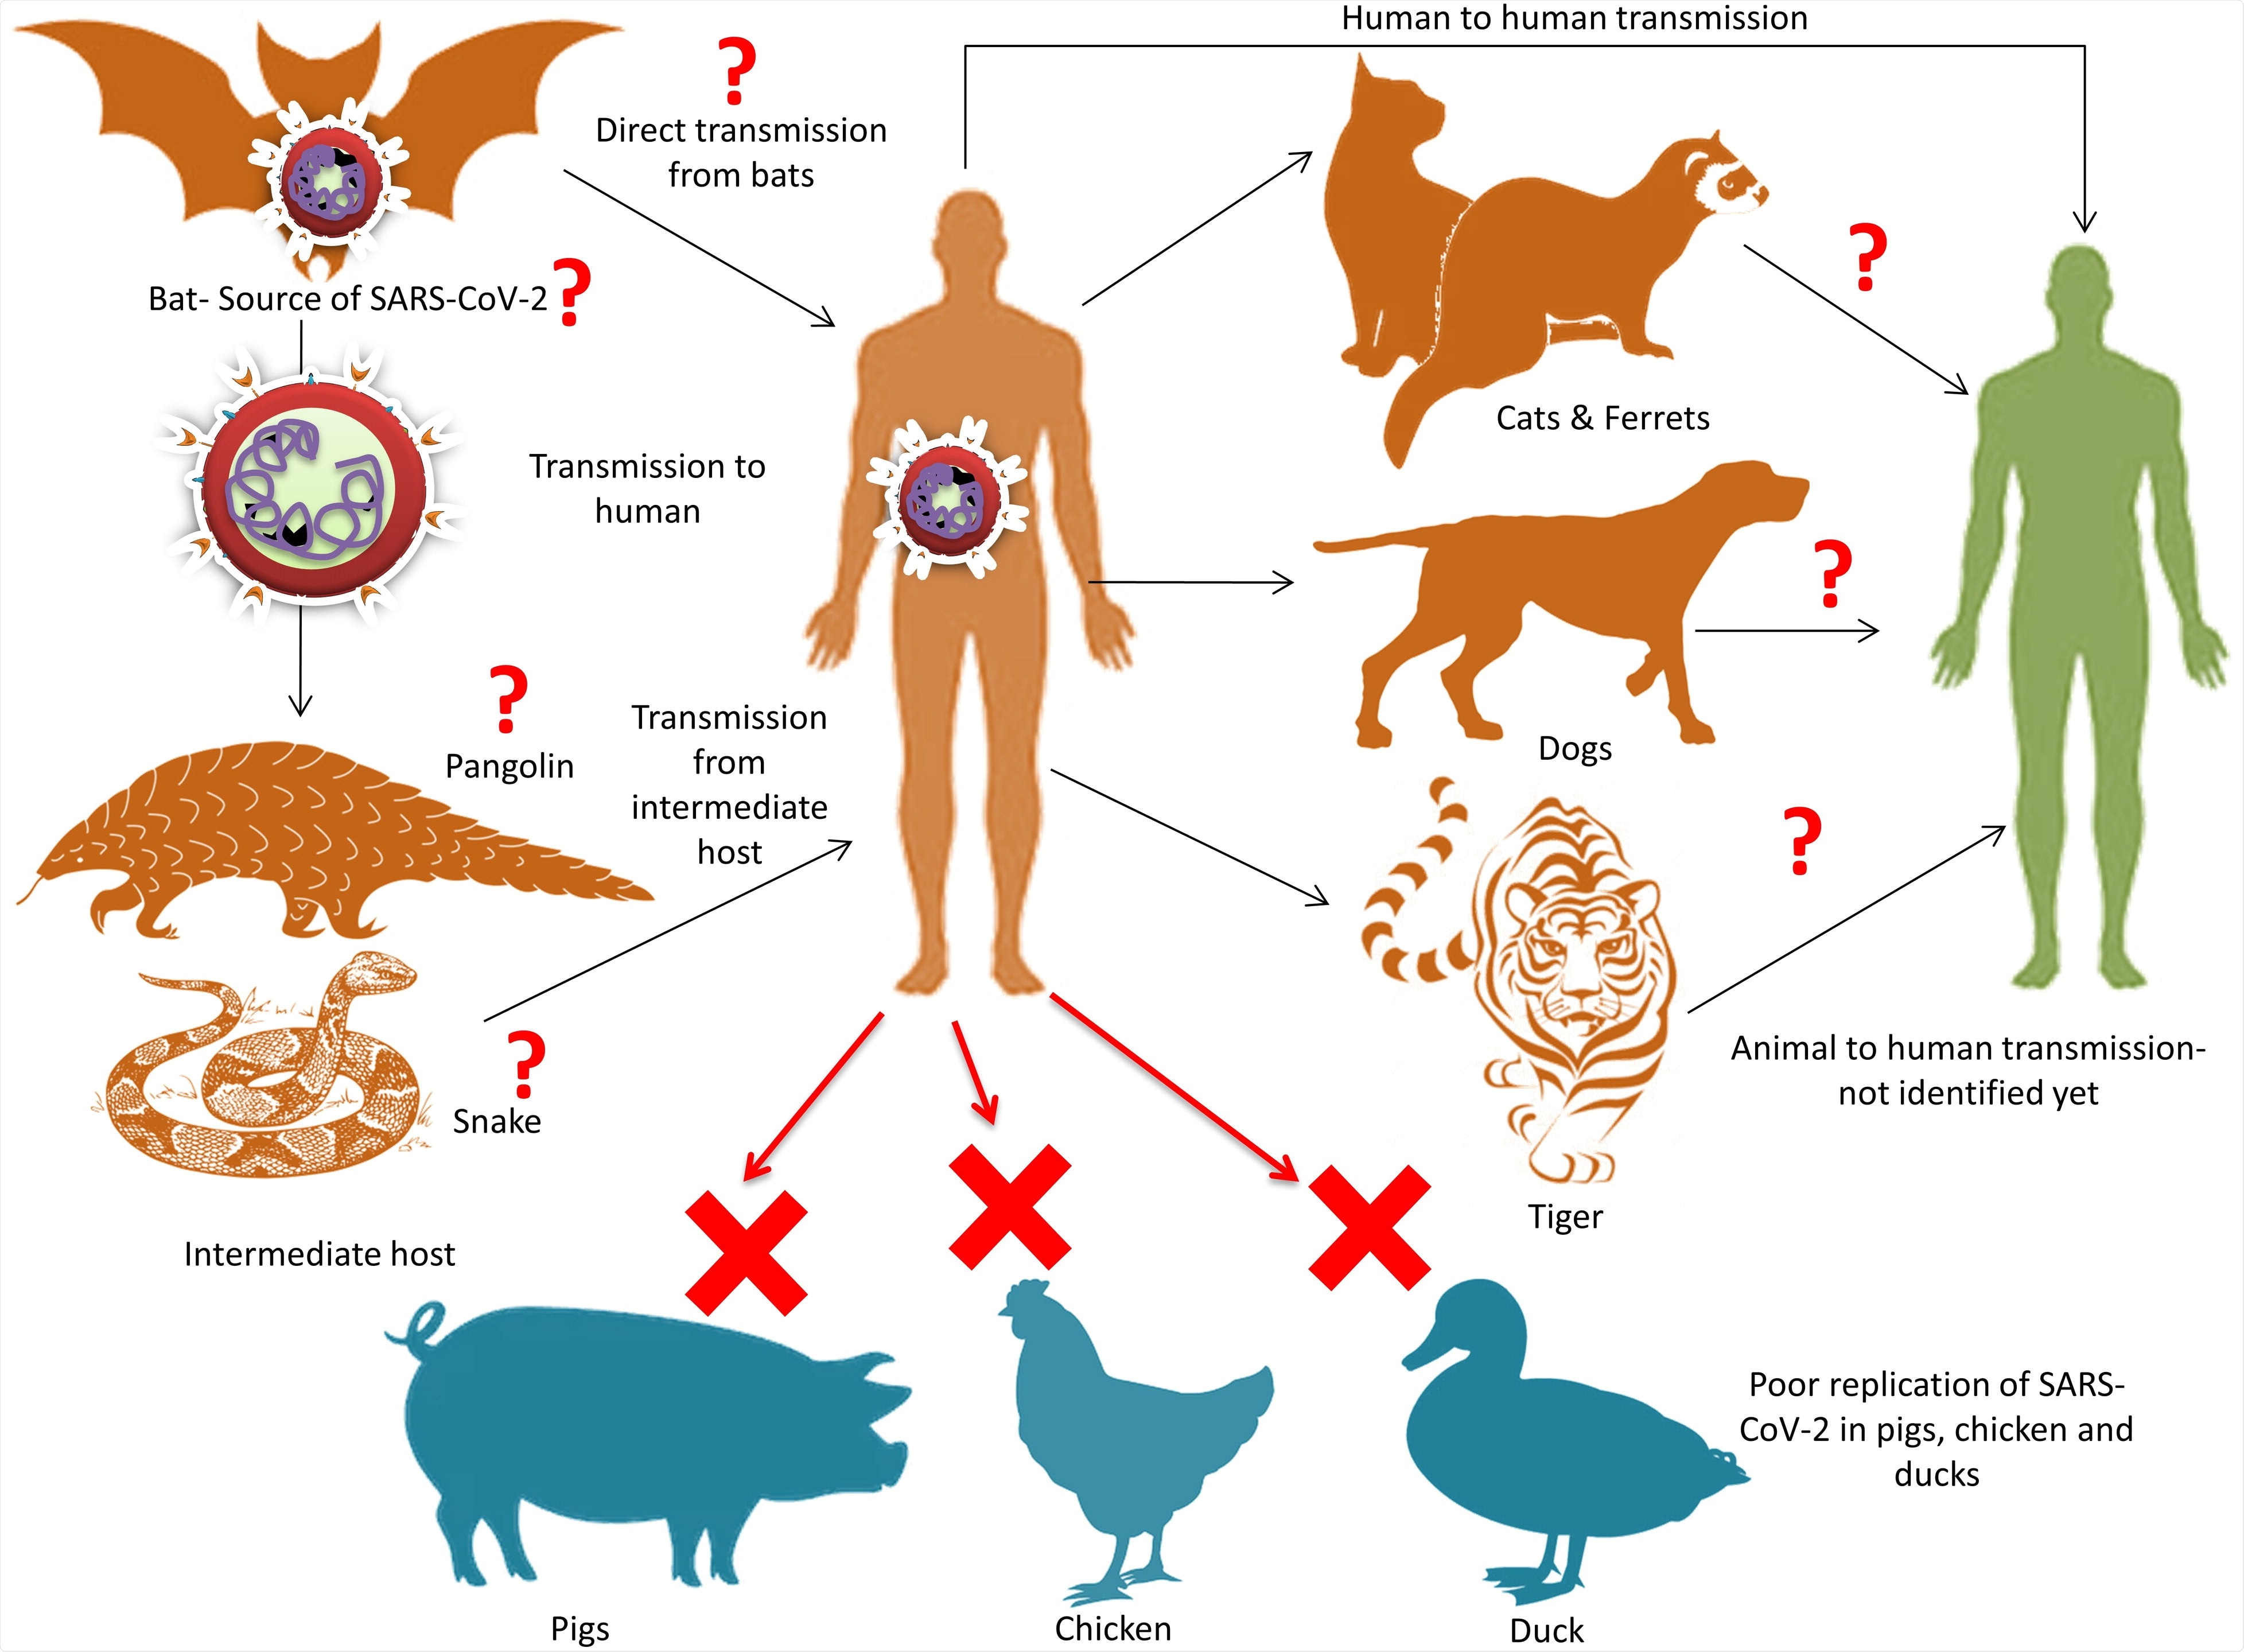 Zoonotic links of SARS-CoV-2. Bat has been reported as the reservoir source of SARS-CoV-2. The intermediate host is not yet elucidated clearly and presently snake and/or pangolins are reported to the intermediate host. Reports regarding the transmission of SARS-CoV-2 from human to animal have been speculated. Study also shows that SARS-CoV-2 replicate poorly in pig, chicken and duck while ferrets and cats are susceptible.